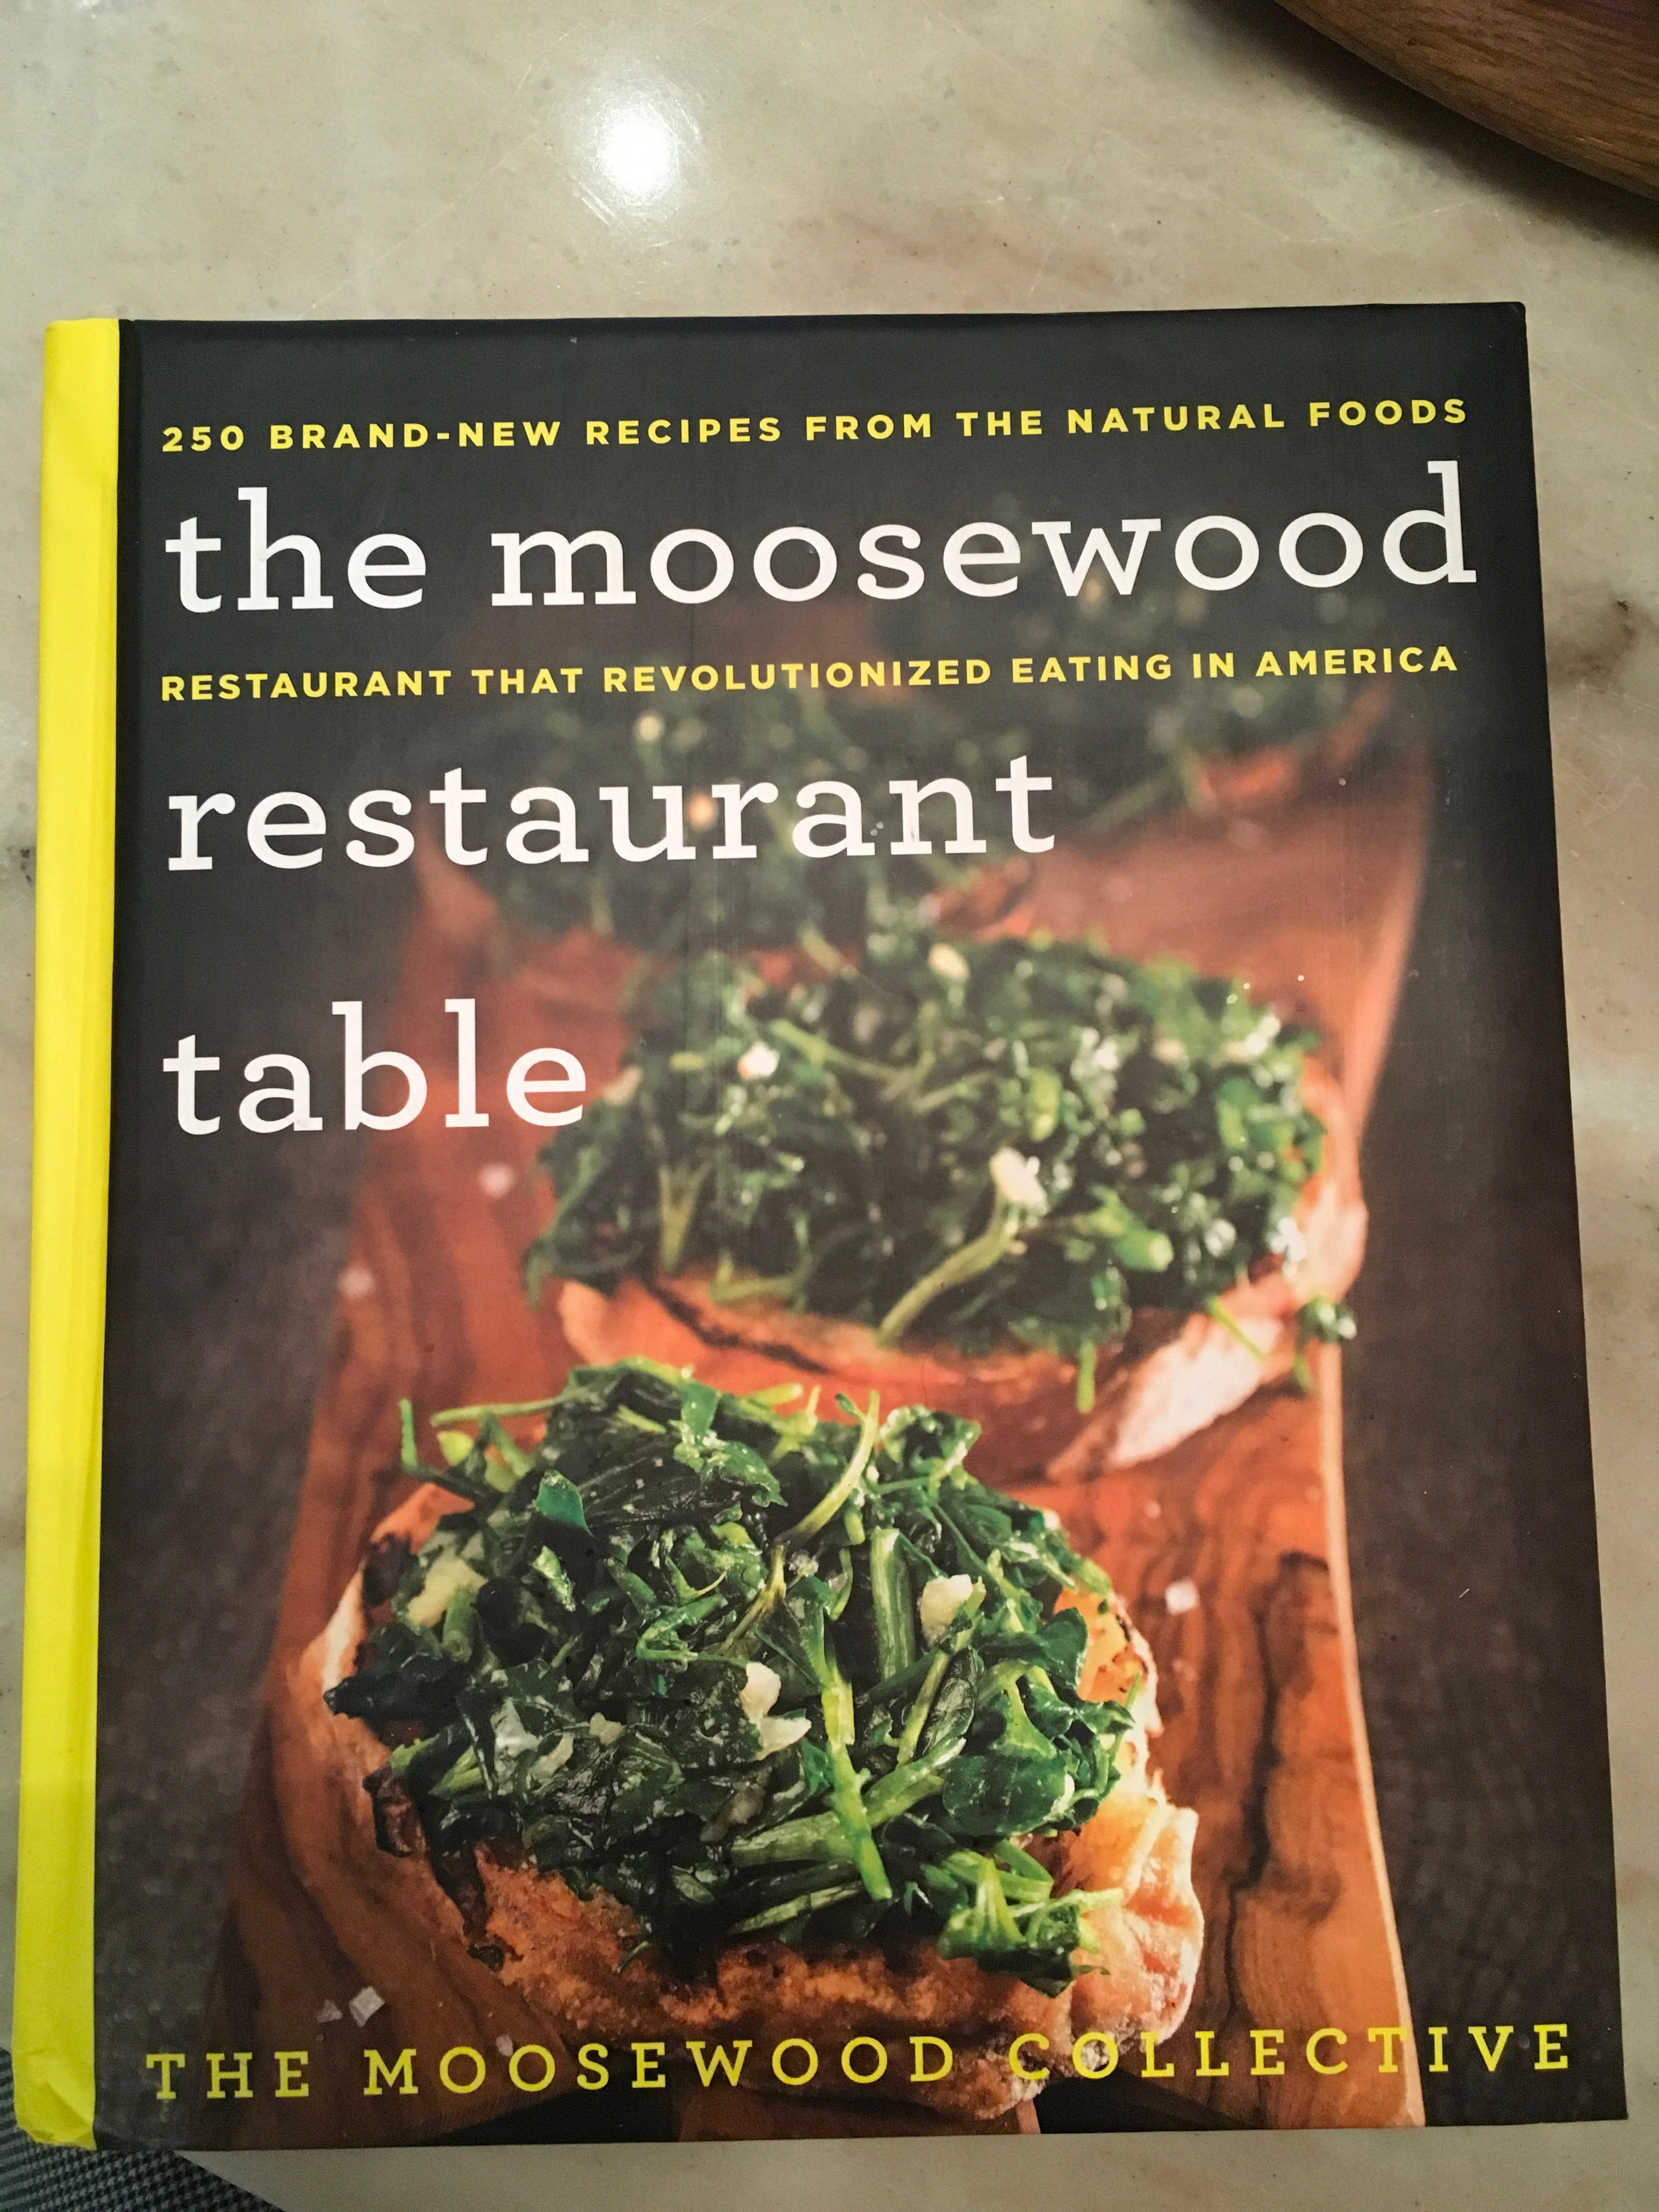 The moosewood restaurant table